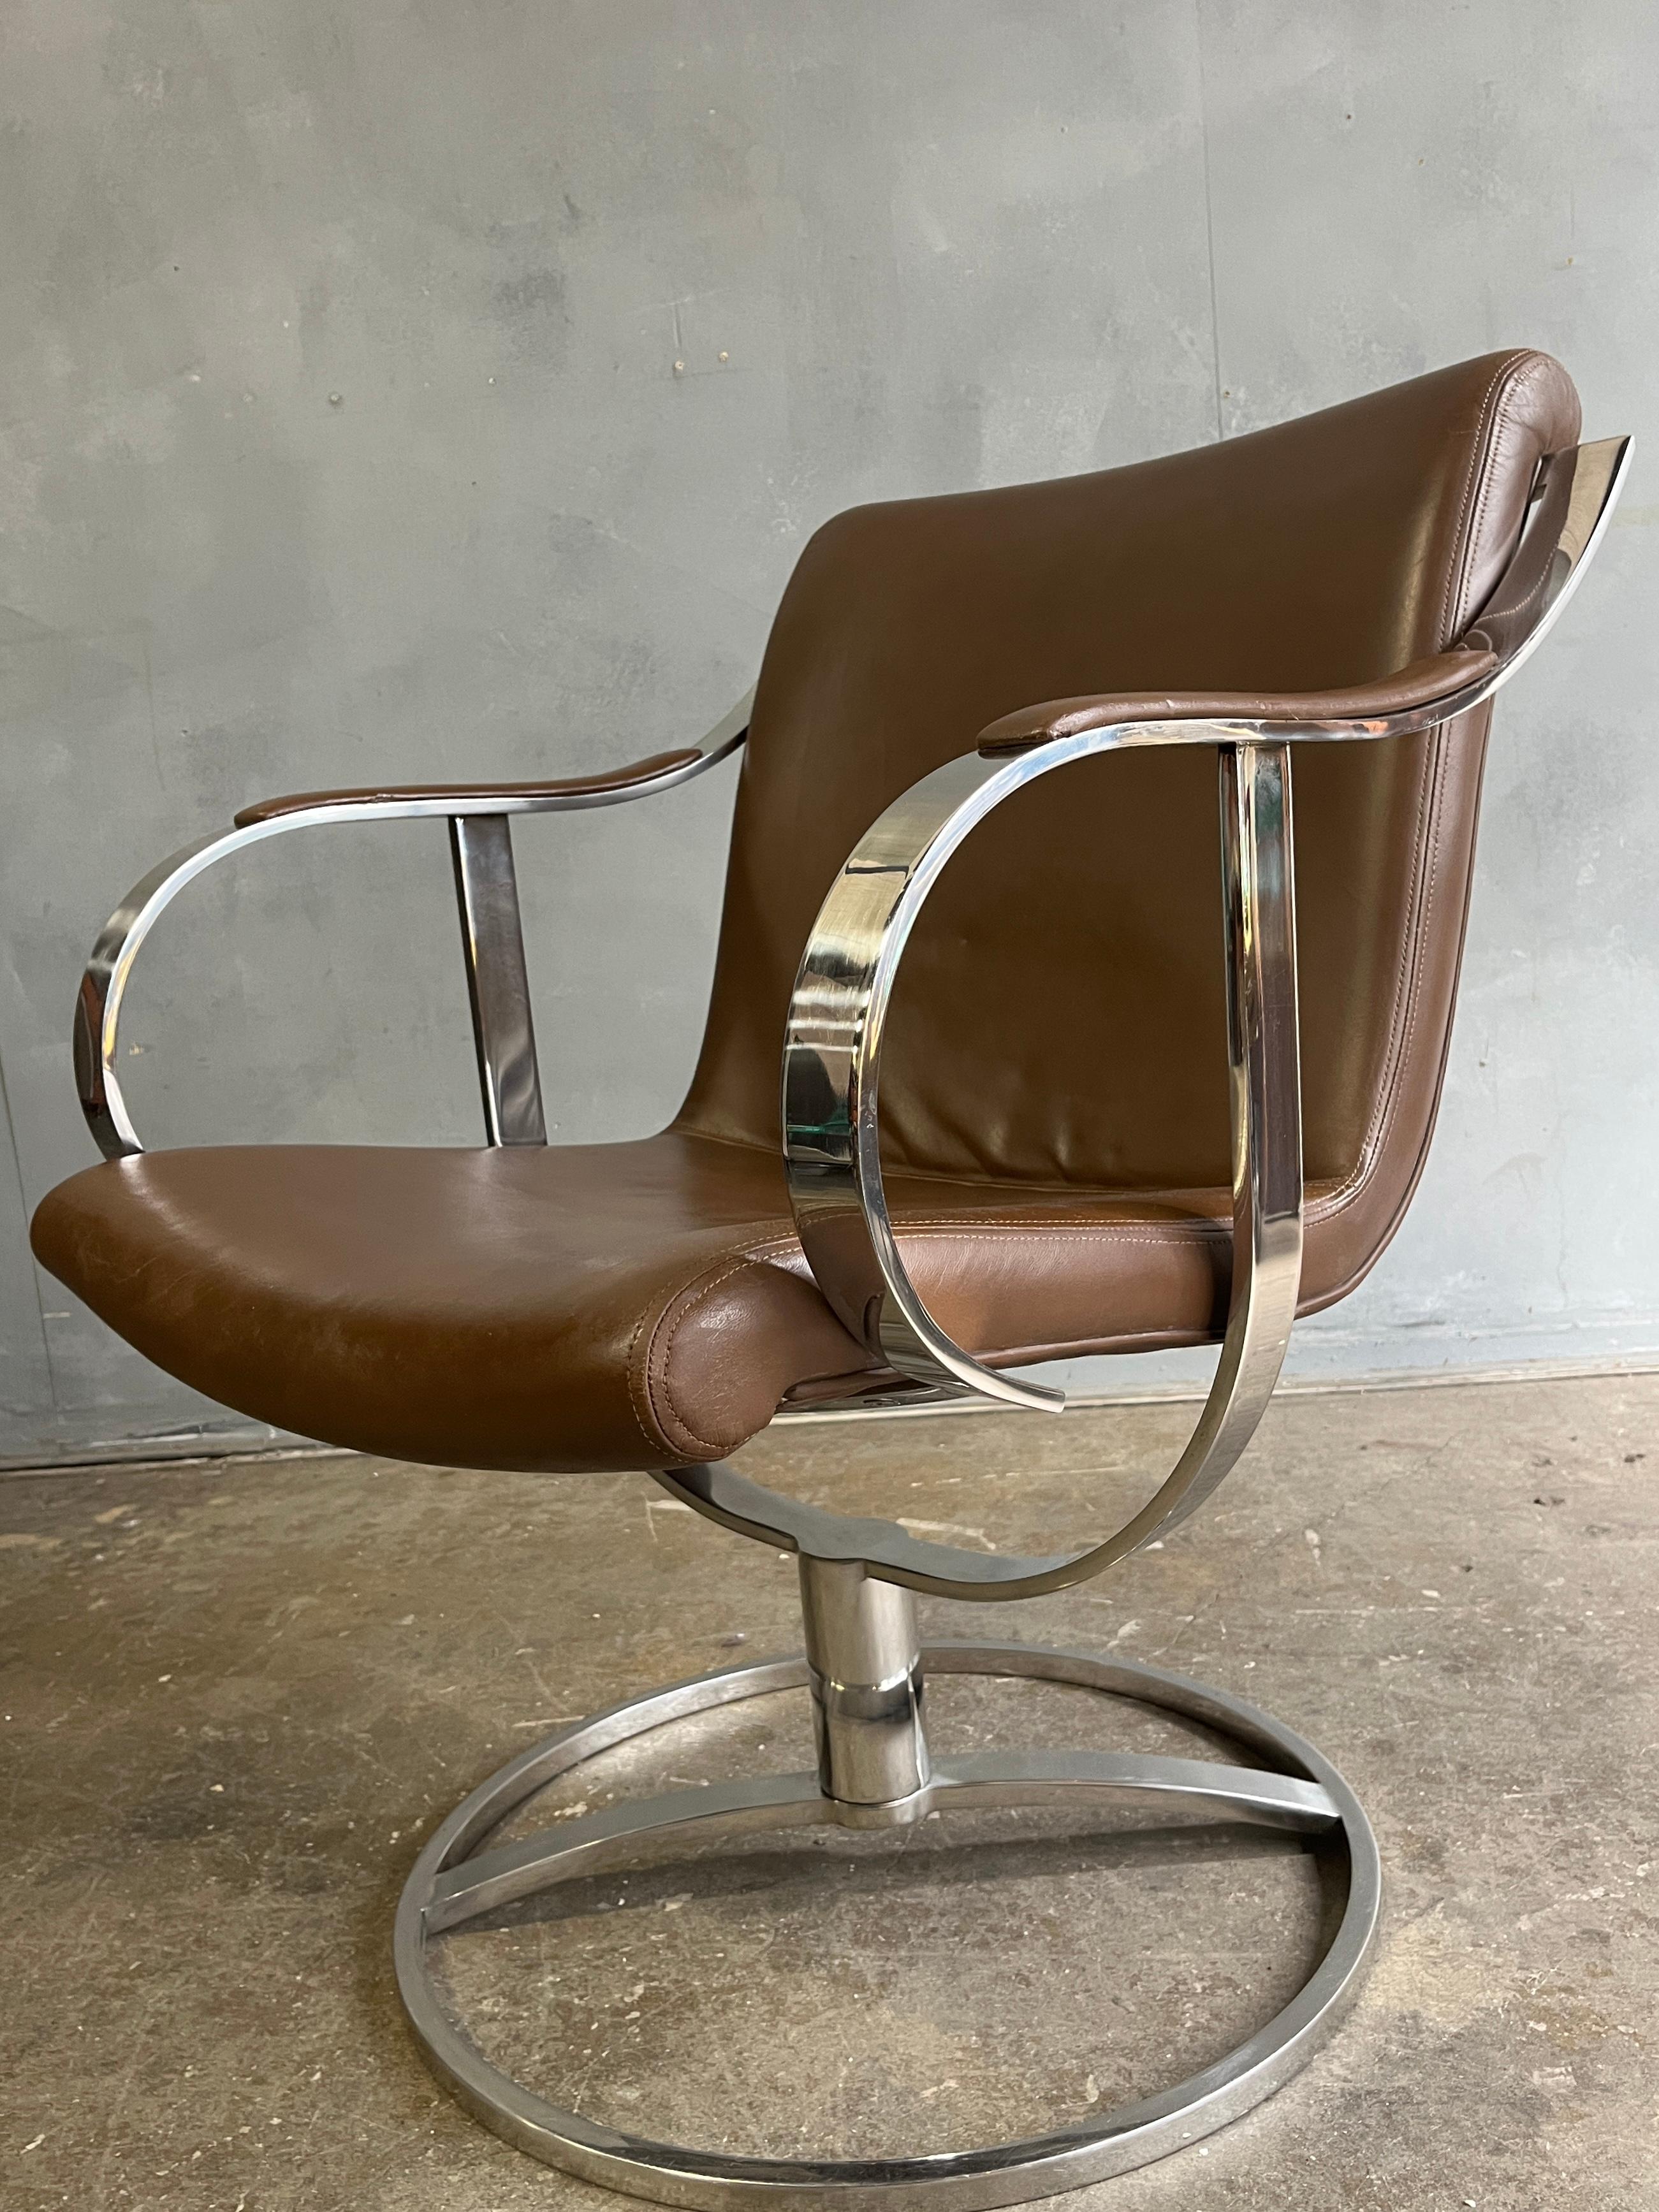 Gardner Leaver for Steelcase Easy chair in saddle brown leather. Chrome is in good shape with no rust. Has just the right angle to be used as an office chair, reading chair or even lounge chair. Swivels 360 with ease. This is a very solid heavy